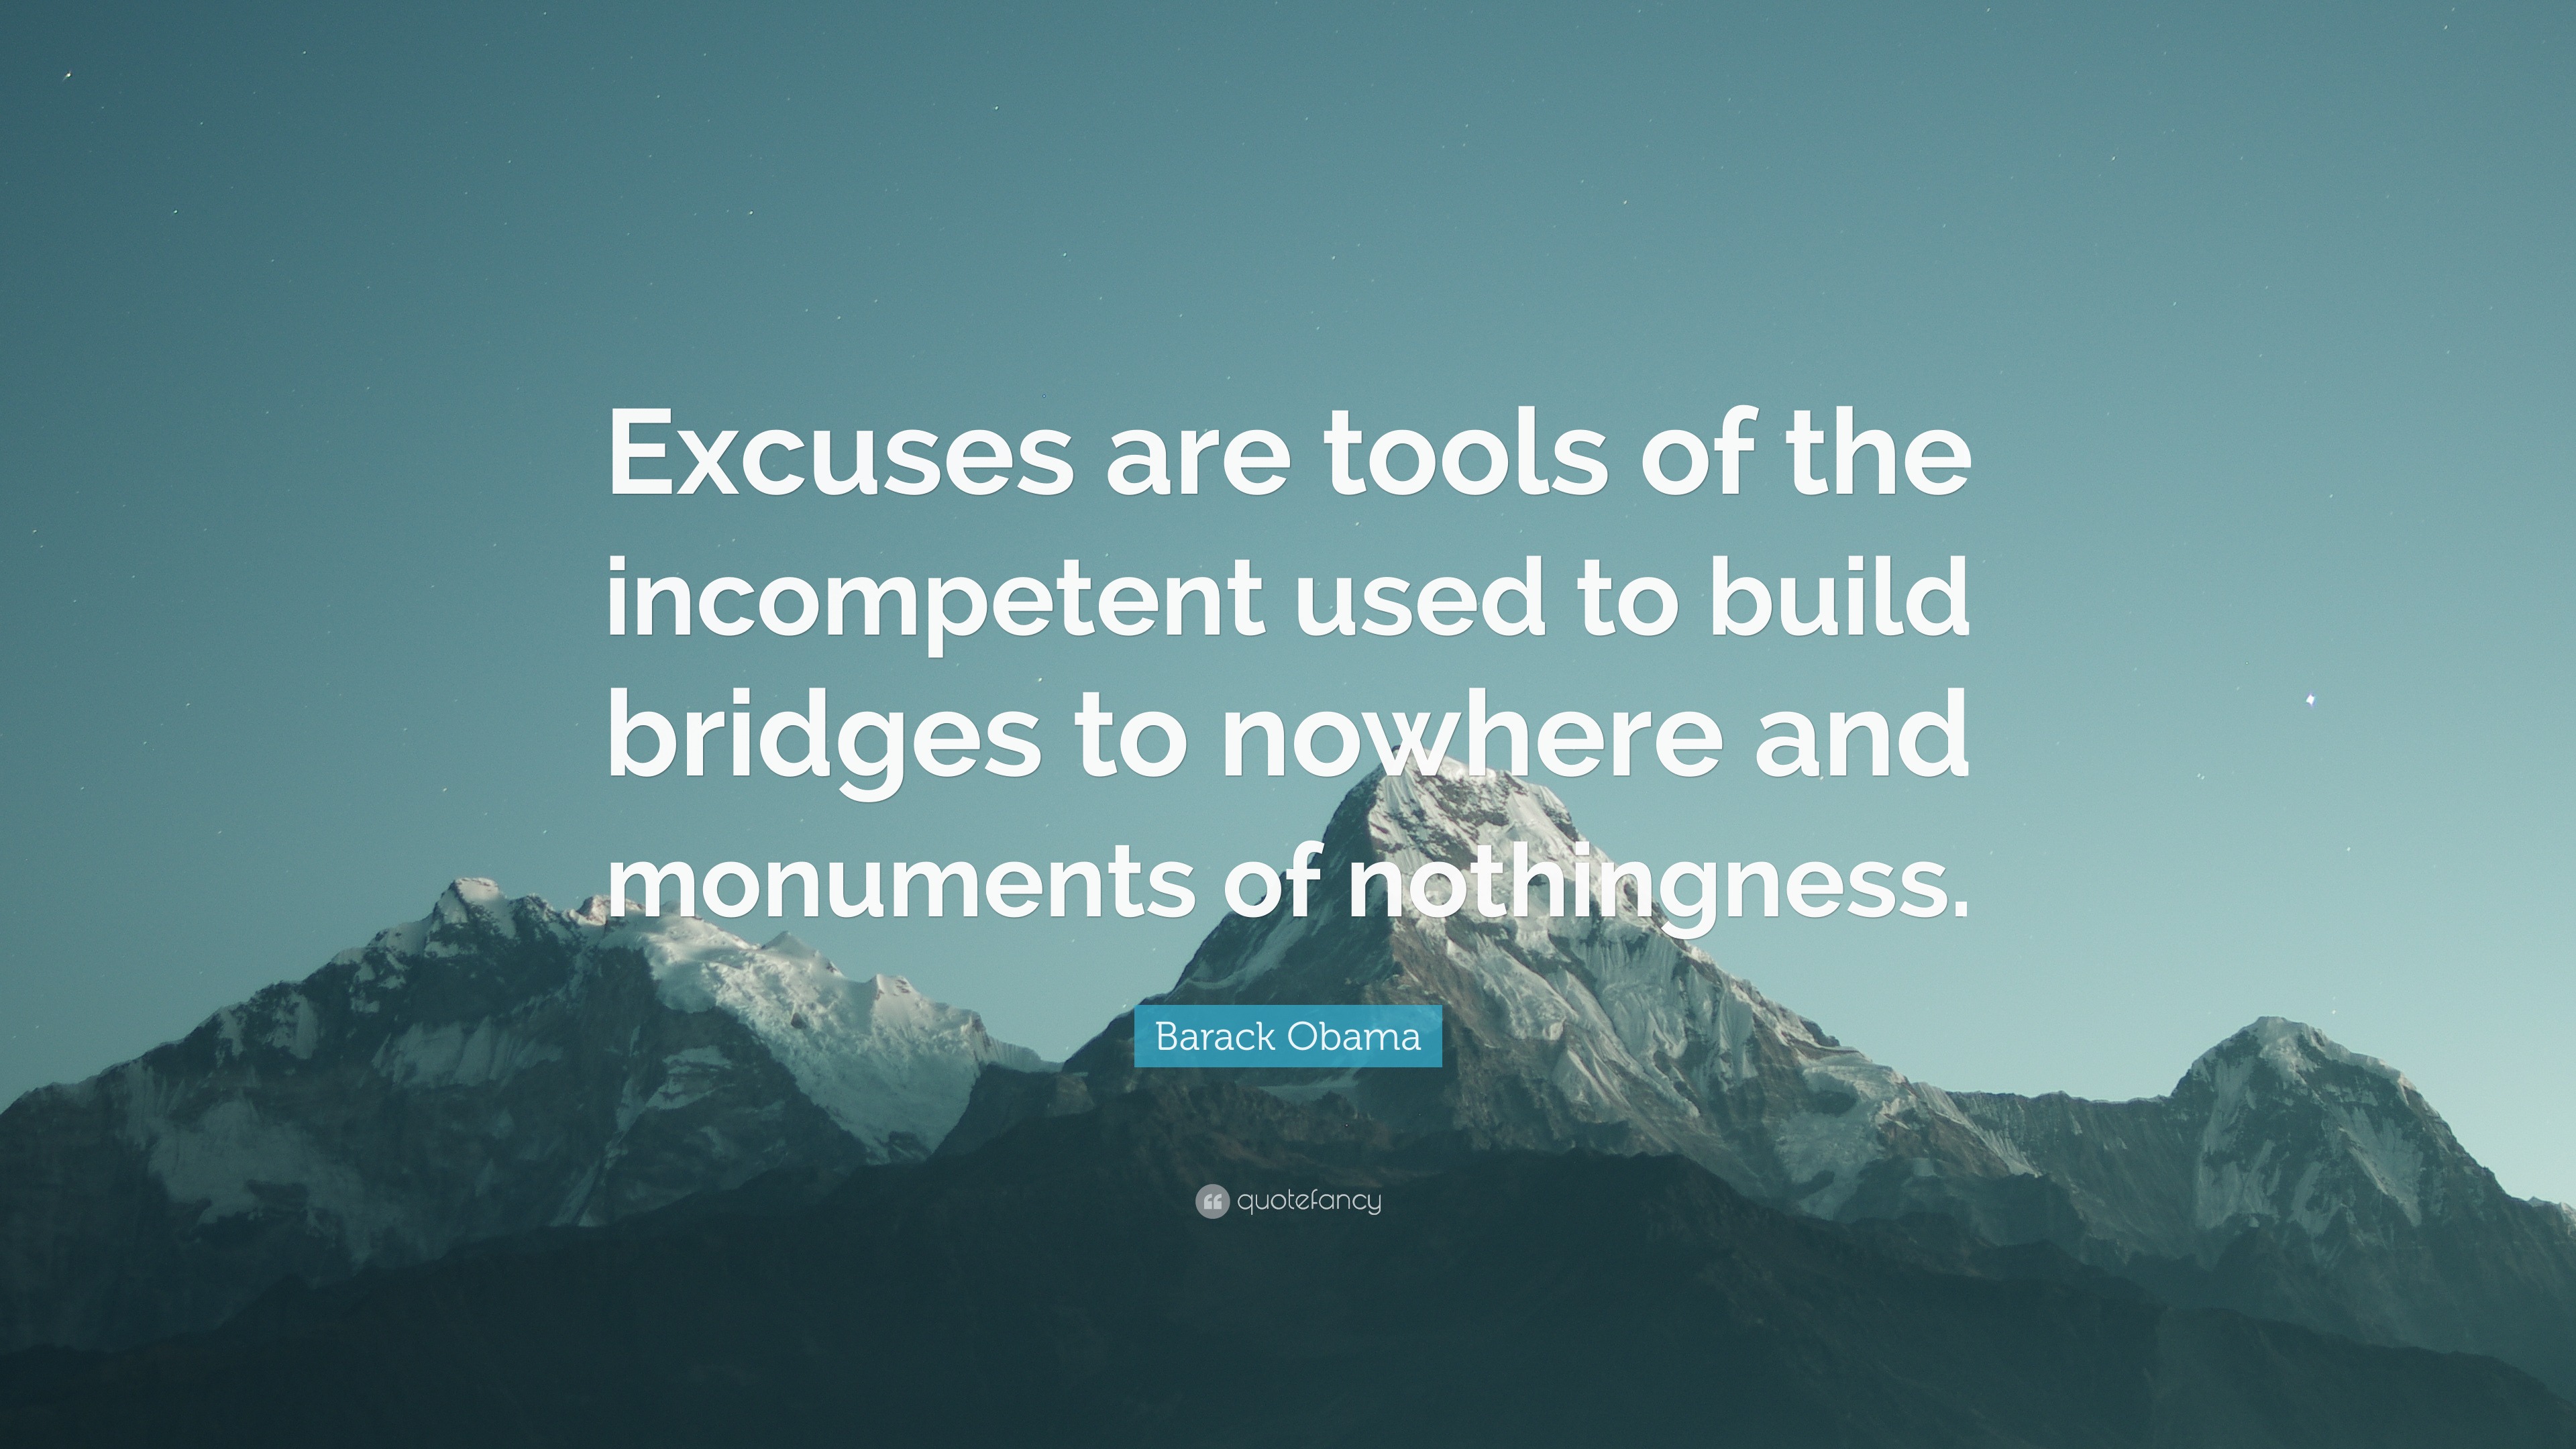 Barack Obama Quote: "Excuses are tools of the incompetent used to build bridges to nowhere and ...